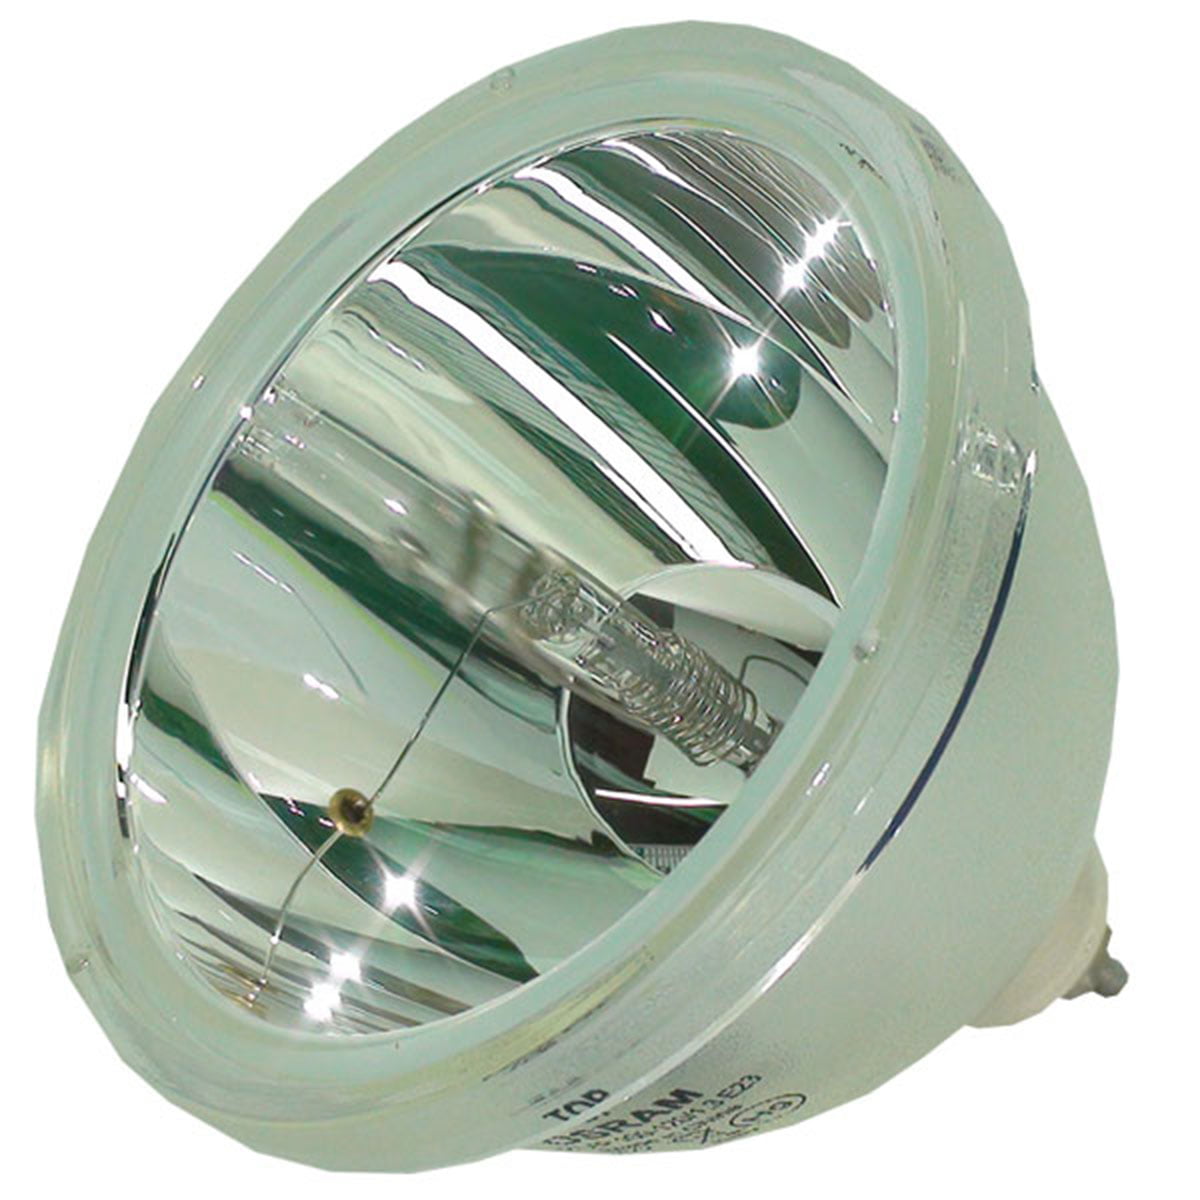 Replacement for RCA Hd50lpw42yx3 Lamp & Housing Projector Tv Lamp Bulb by Technical Precision 